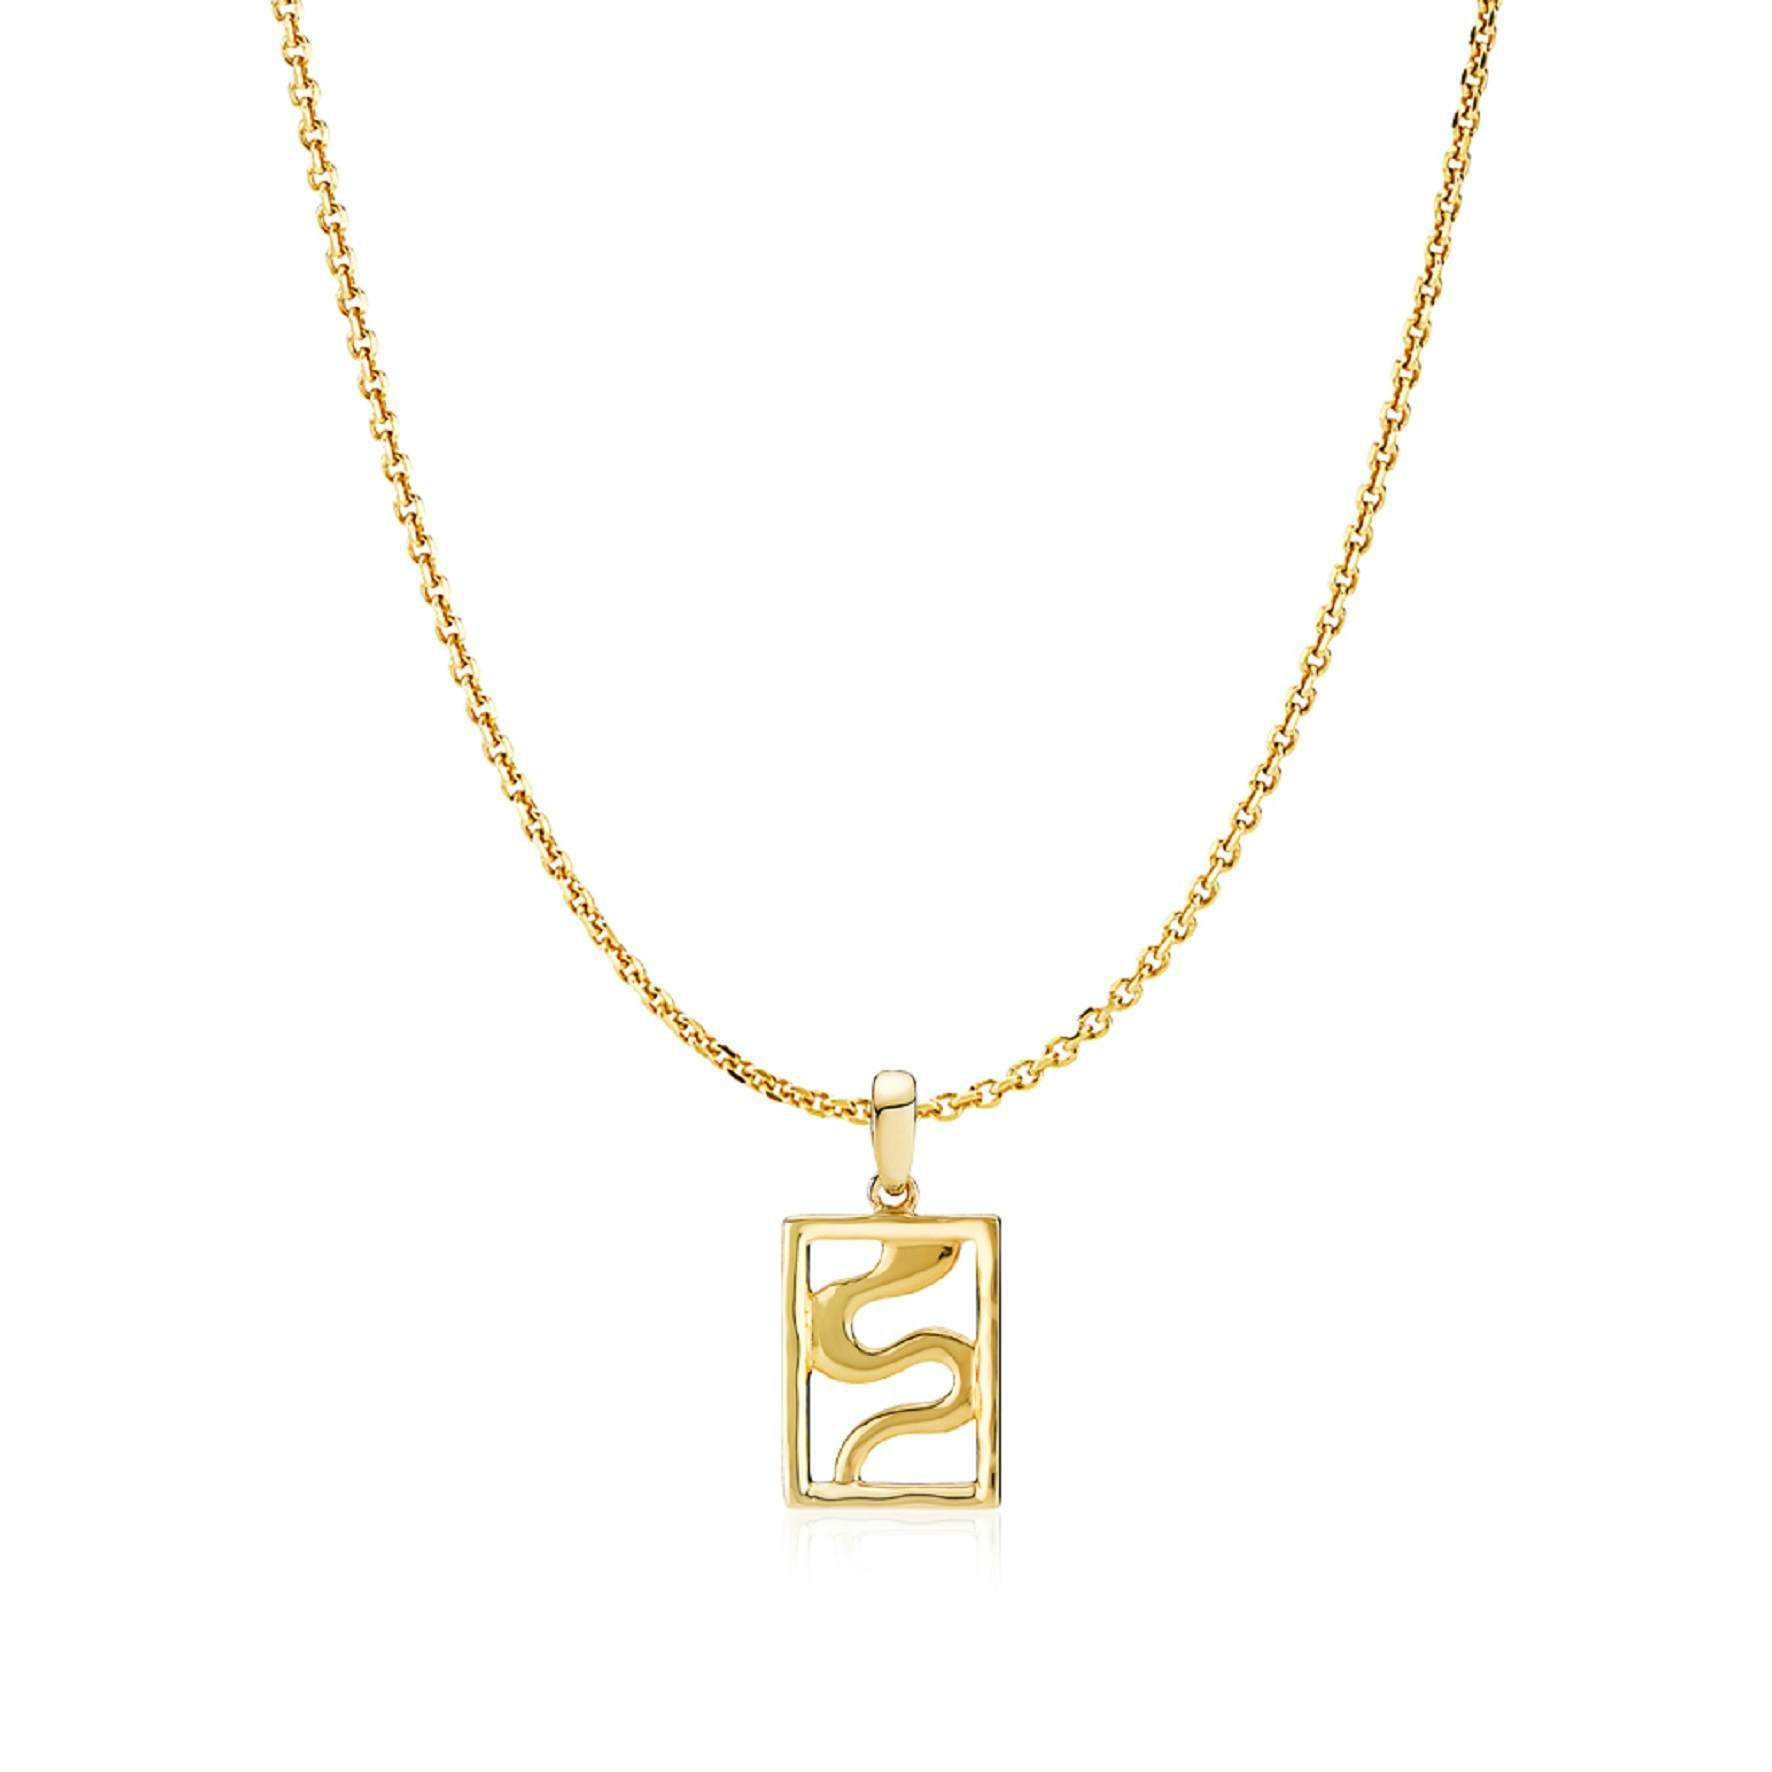 Kathrine Fisker by Sistie Necklace